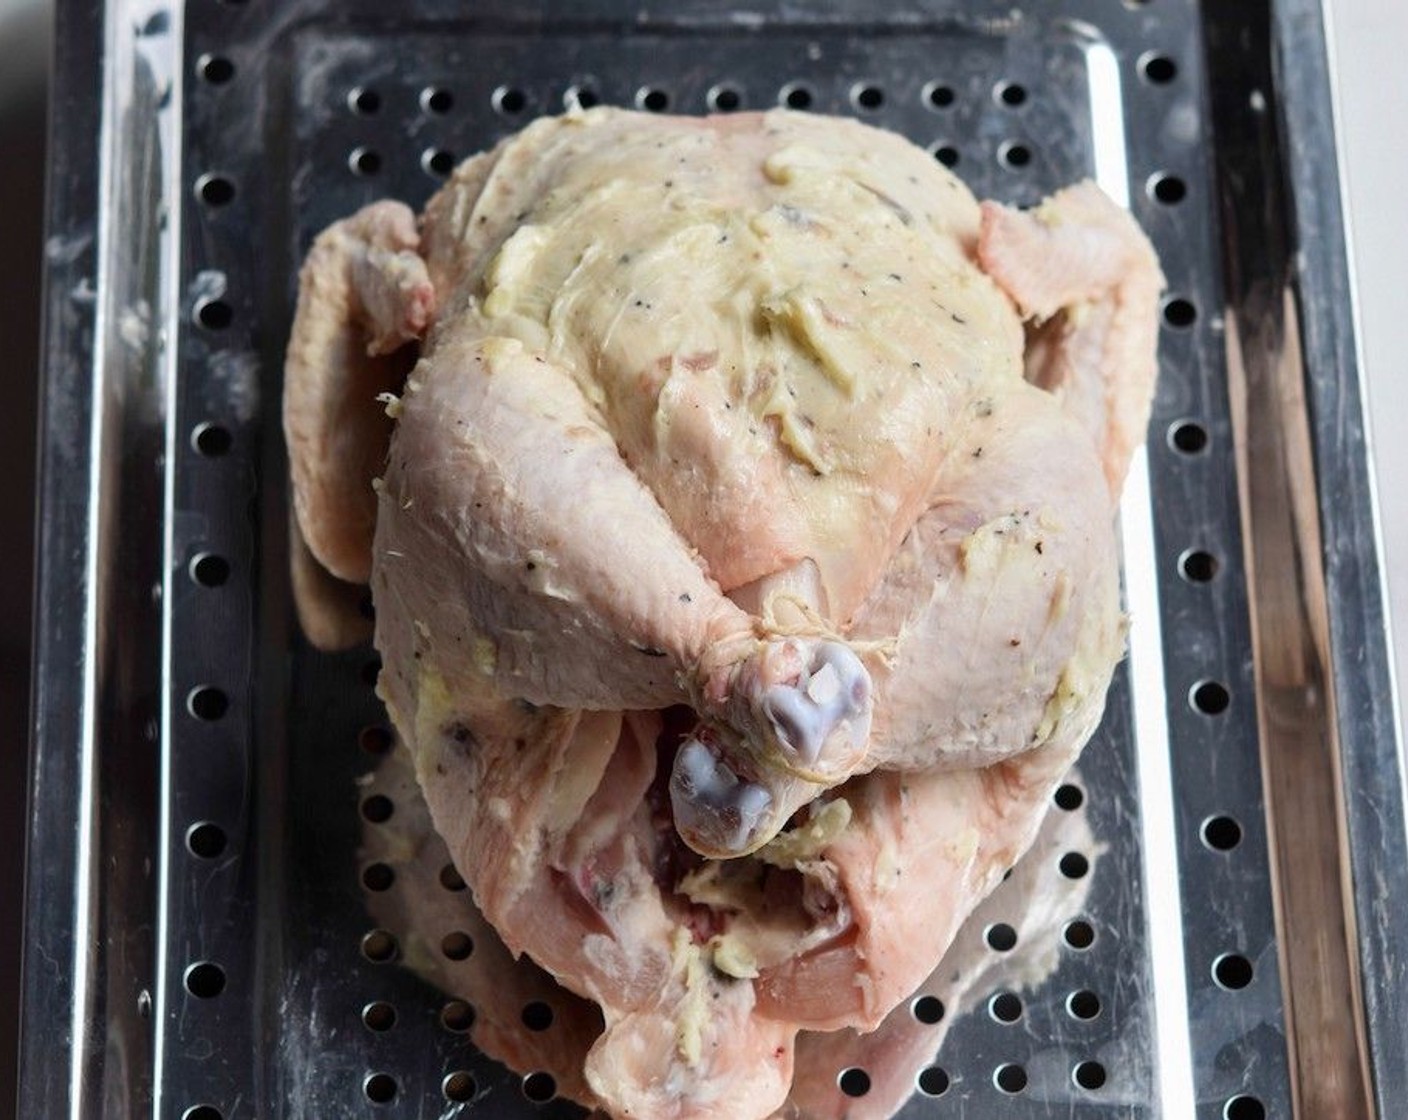 step 4 Using your fingers, rub the anchovy butter all over the chicken. Loosen the skin over the breast and push butter into the pocket as this ensures a juicy roast. Keep a little of the anchovy butter aside to baste the chicken as it cooks.